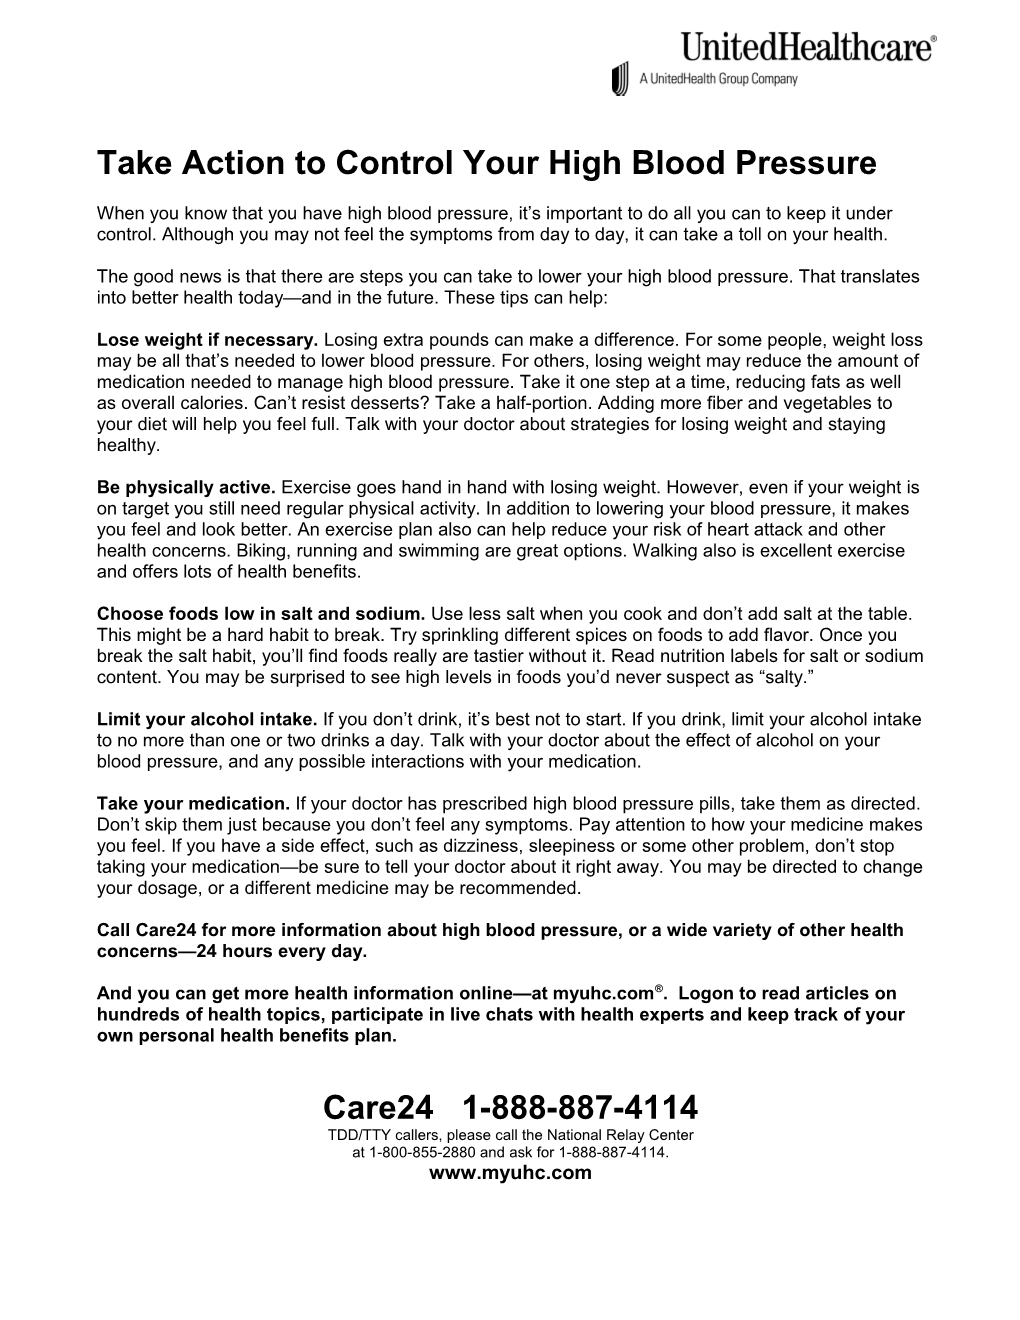 High Blood Pressure; Take Action to Control Your High Blood Pressure